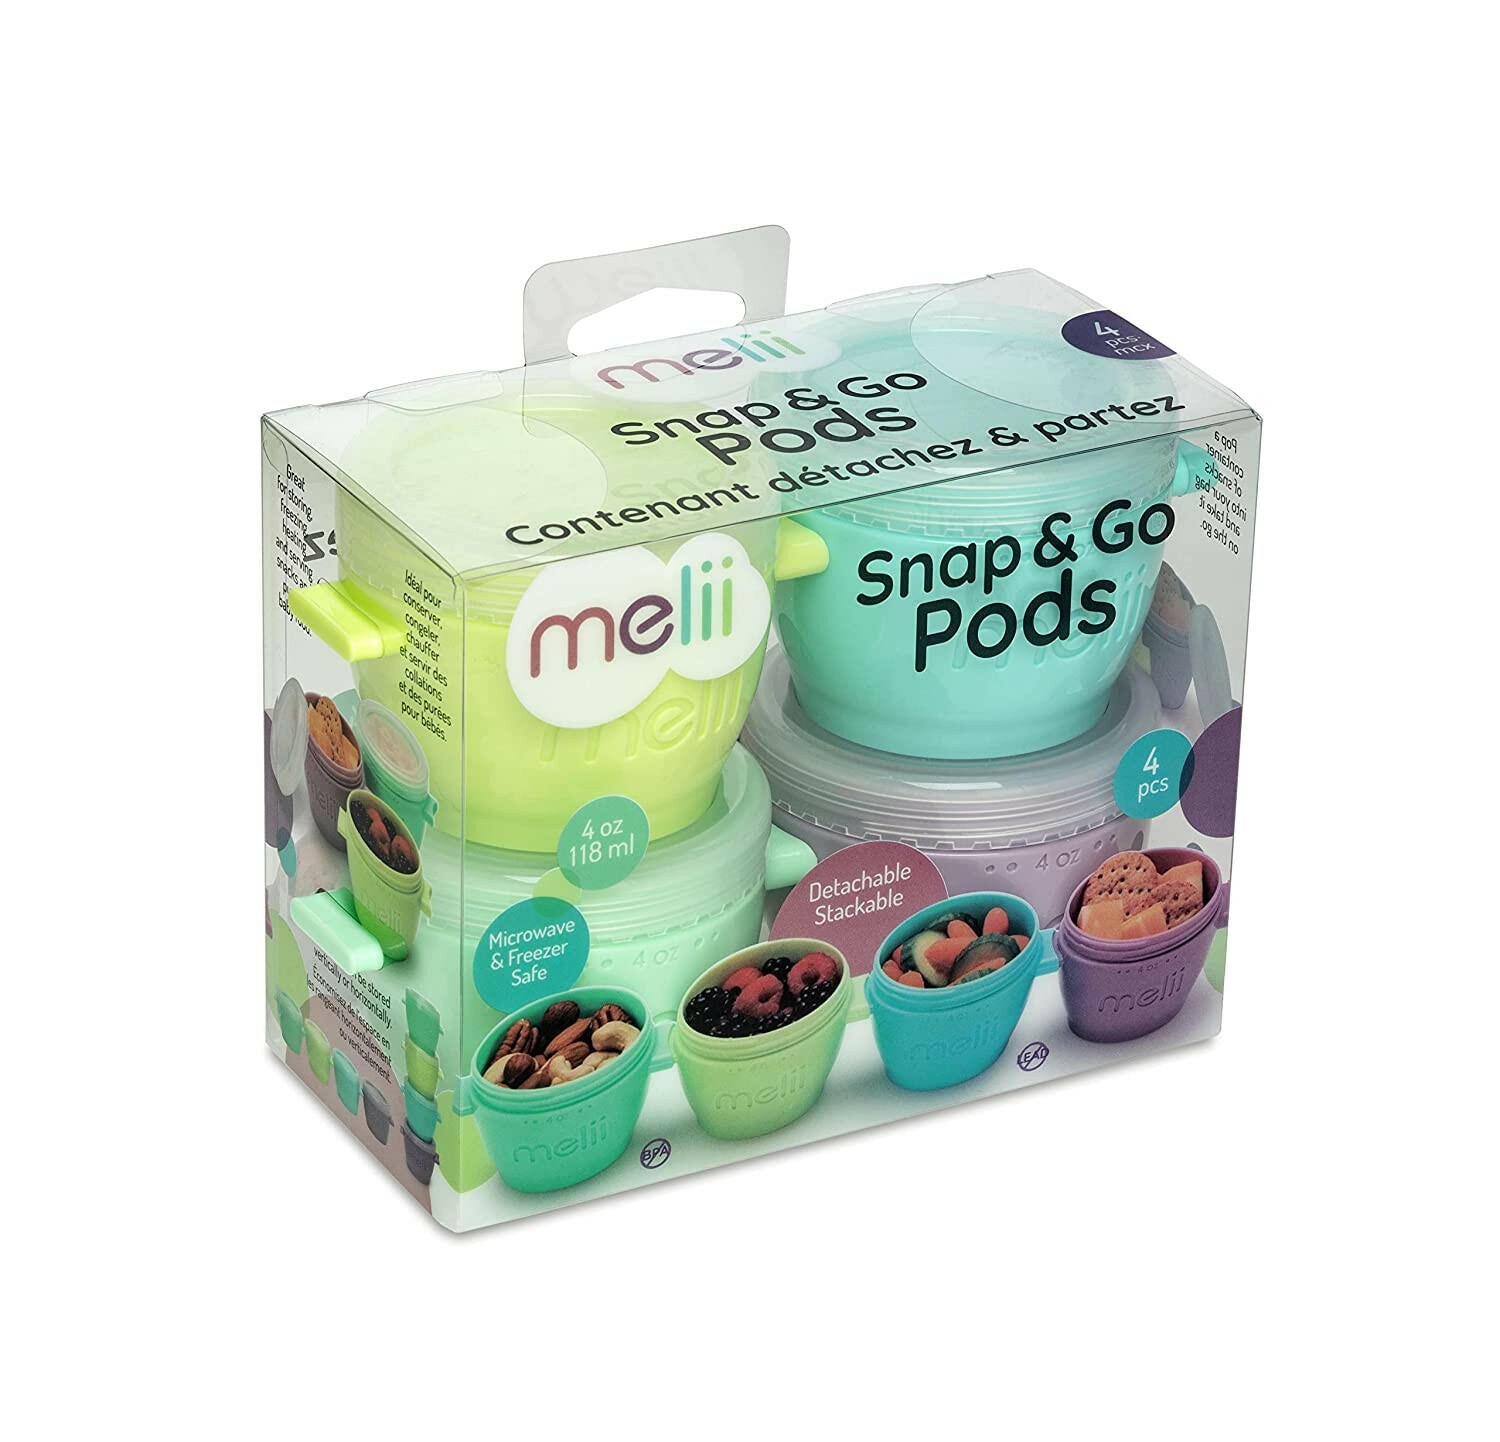 Melii Snap & Go Baby Food Storage Containers with lids, Snack Containers, Freezer safe - Set of 4, 4oz.